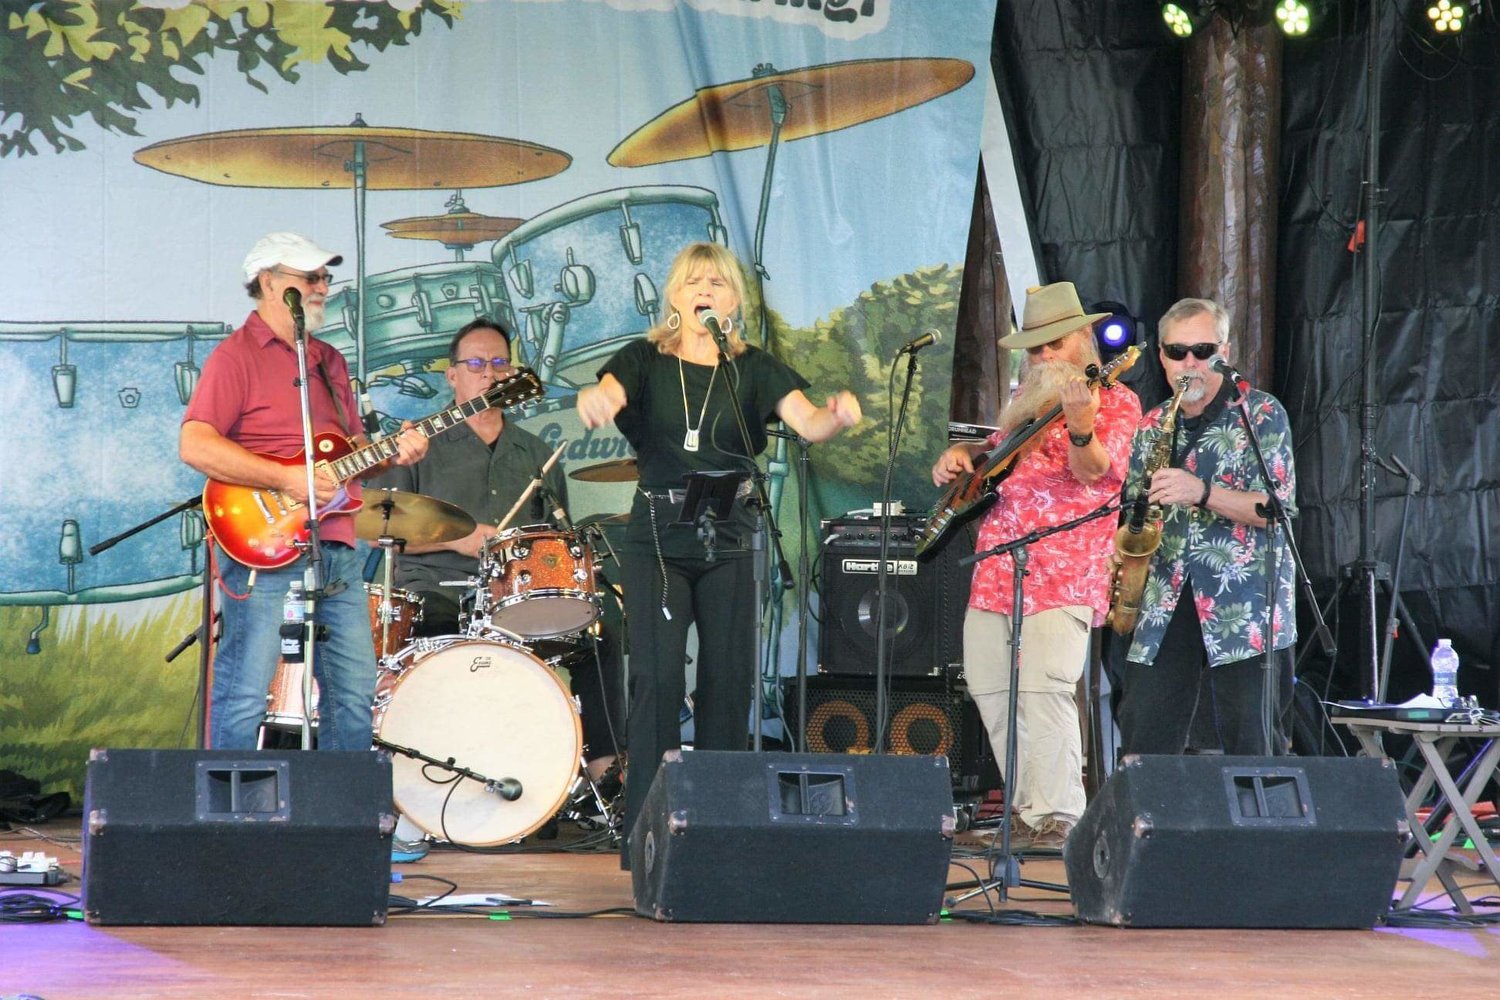 The Fabulous Mojos will perform during Inlet’s Sunsets by the Lake Summer Concert Series on Saturday, Aug. 20